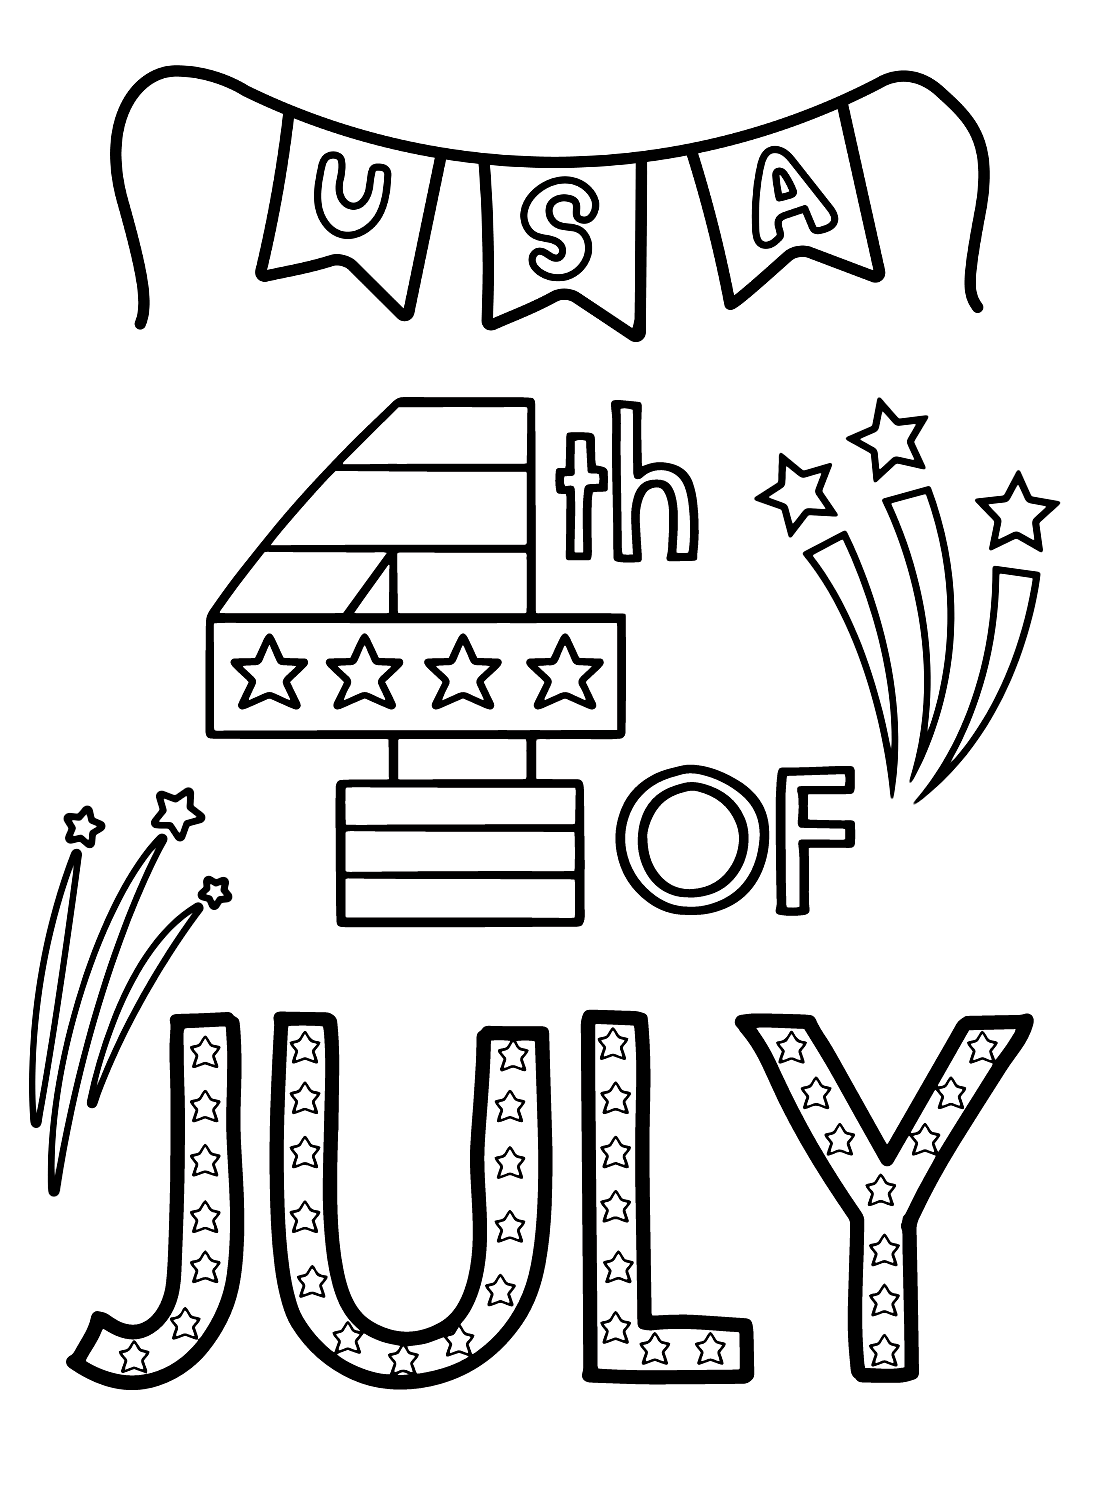 USA 4th of July Coloring Page